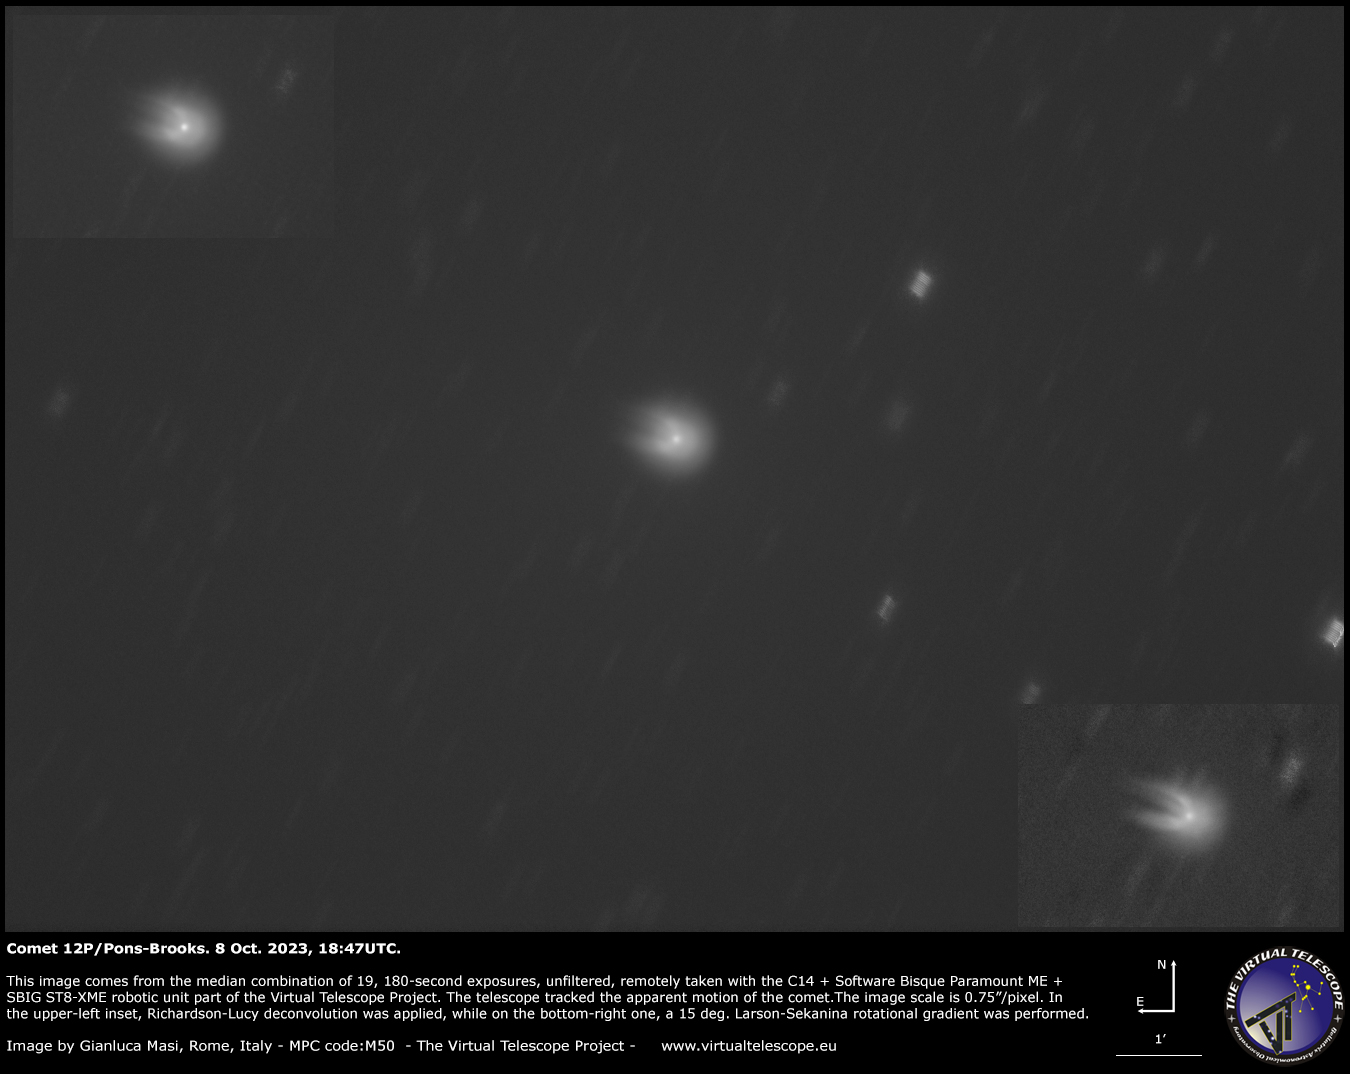 Comet 12P/Pons-Brooks in outburst: 8 Oct. 2023.